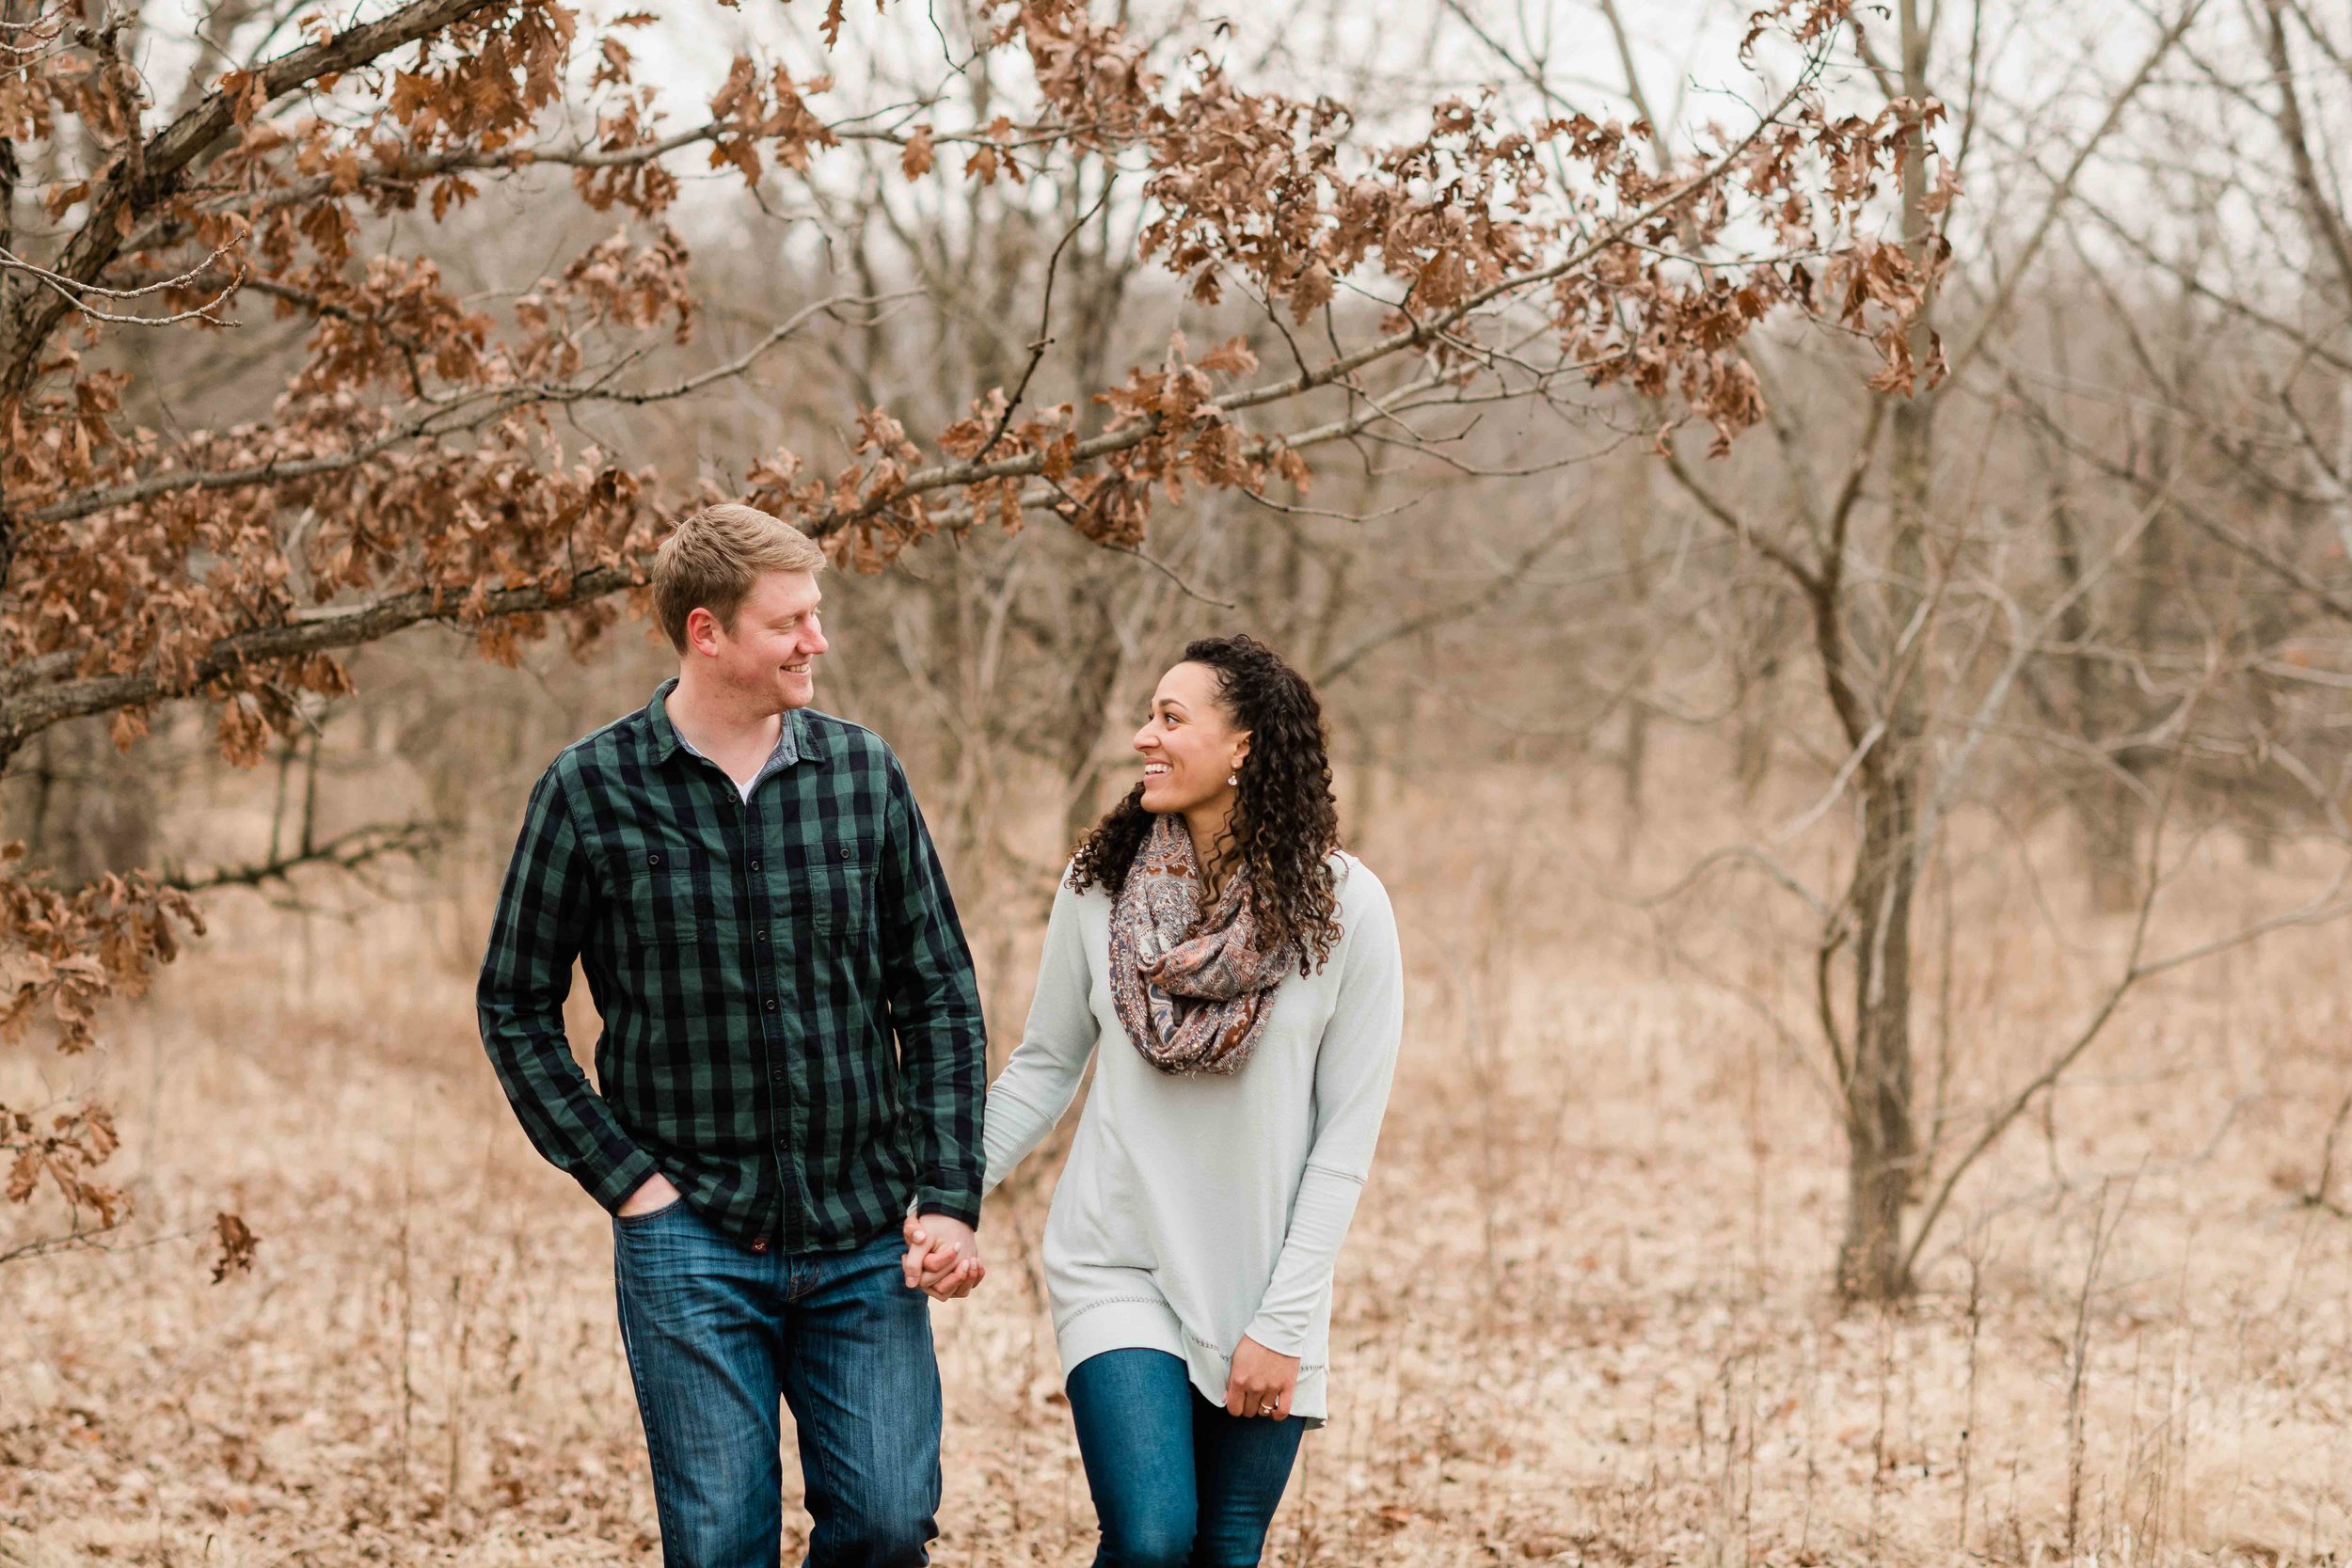 Engaged couple walking in a field before winter